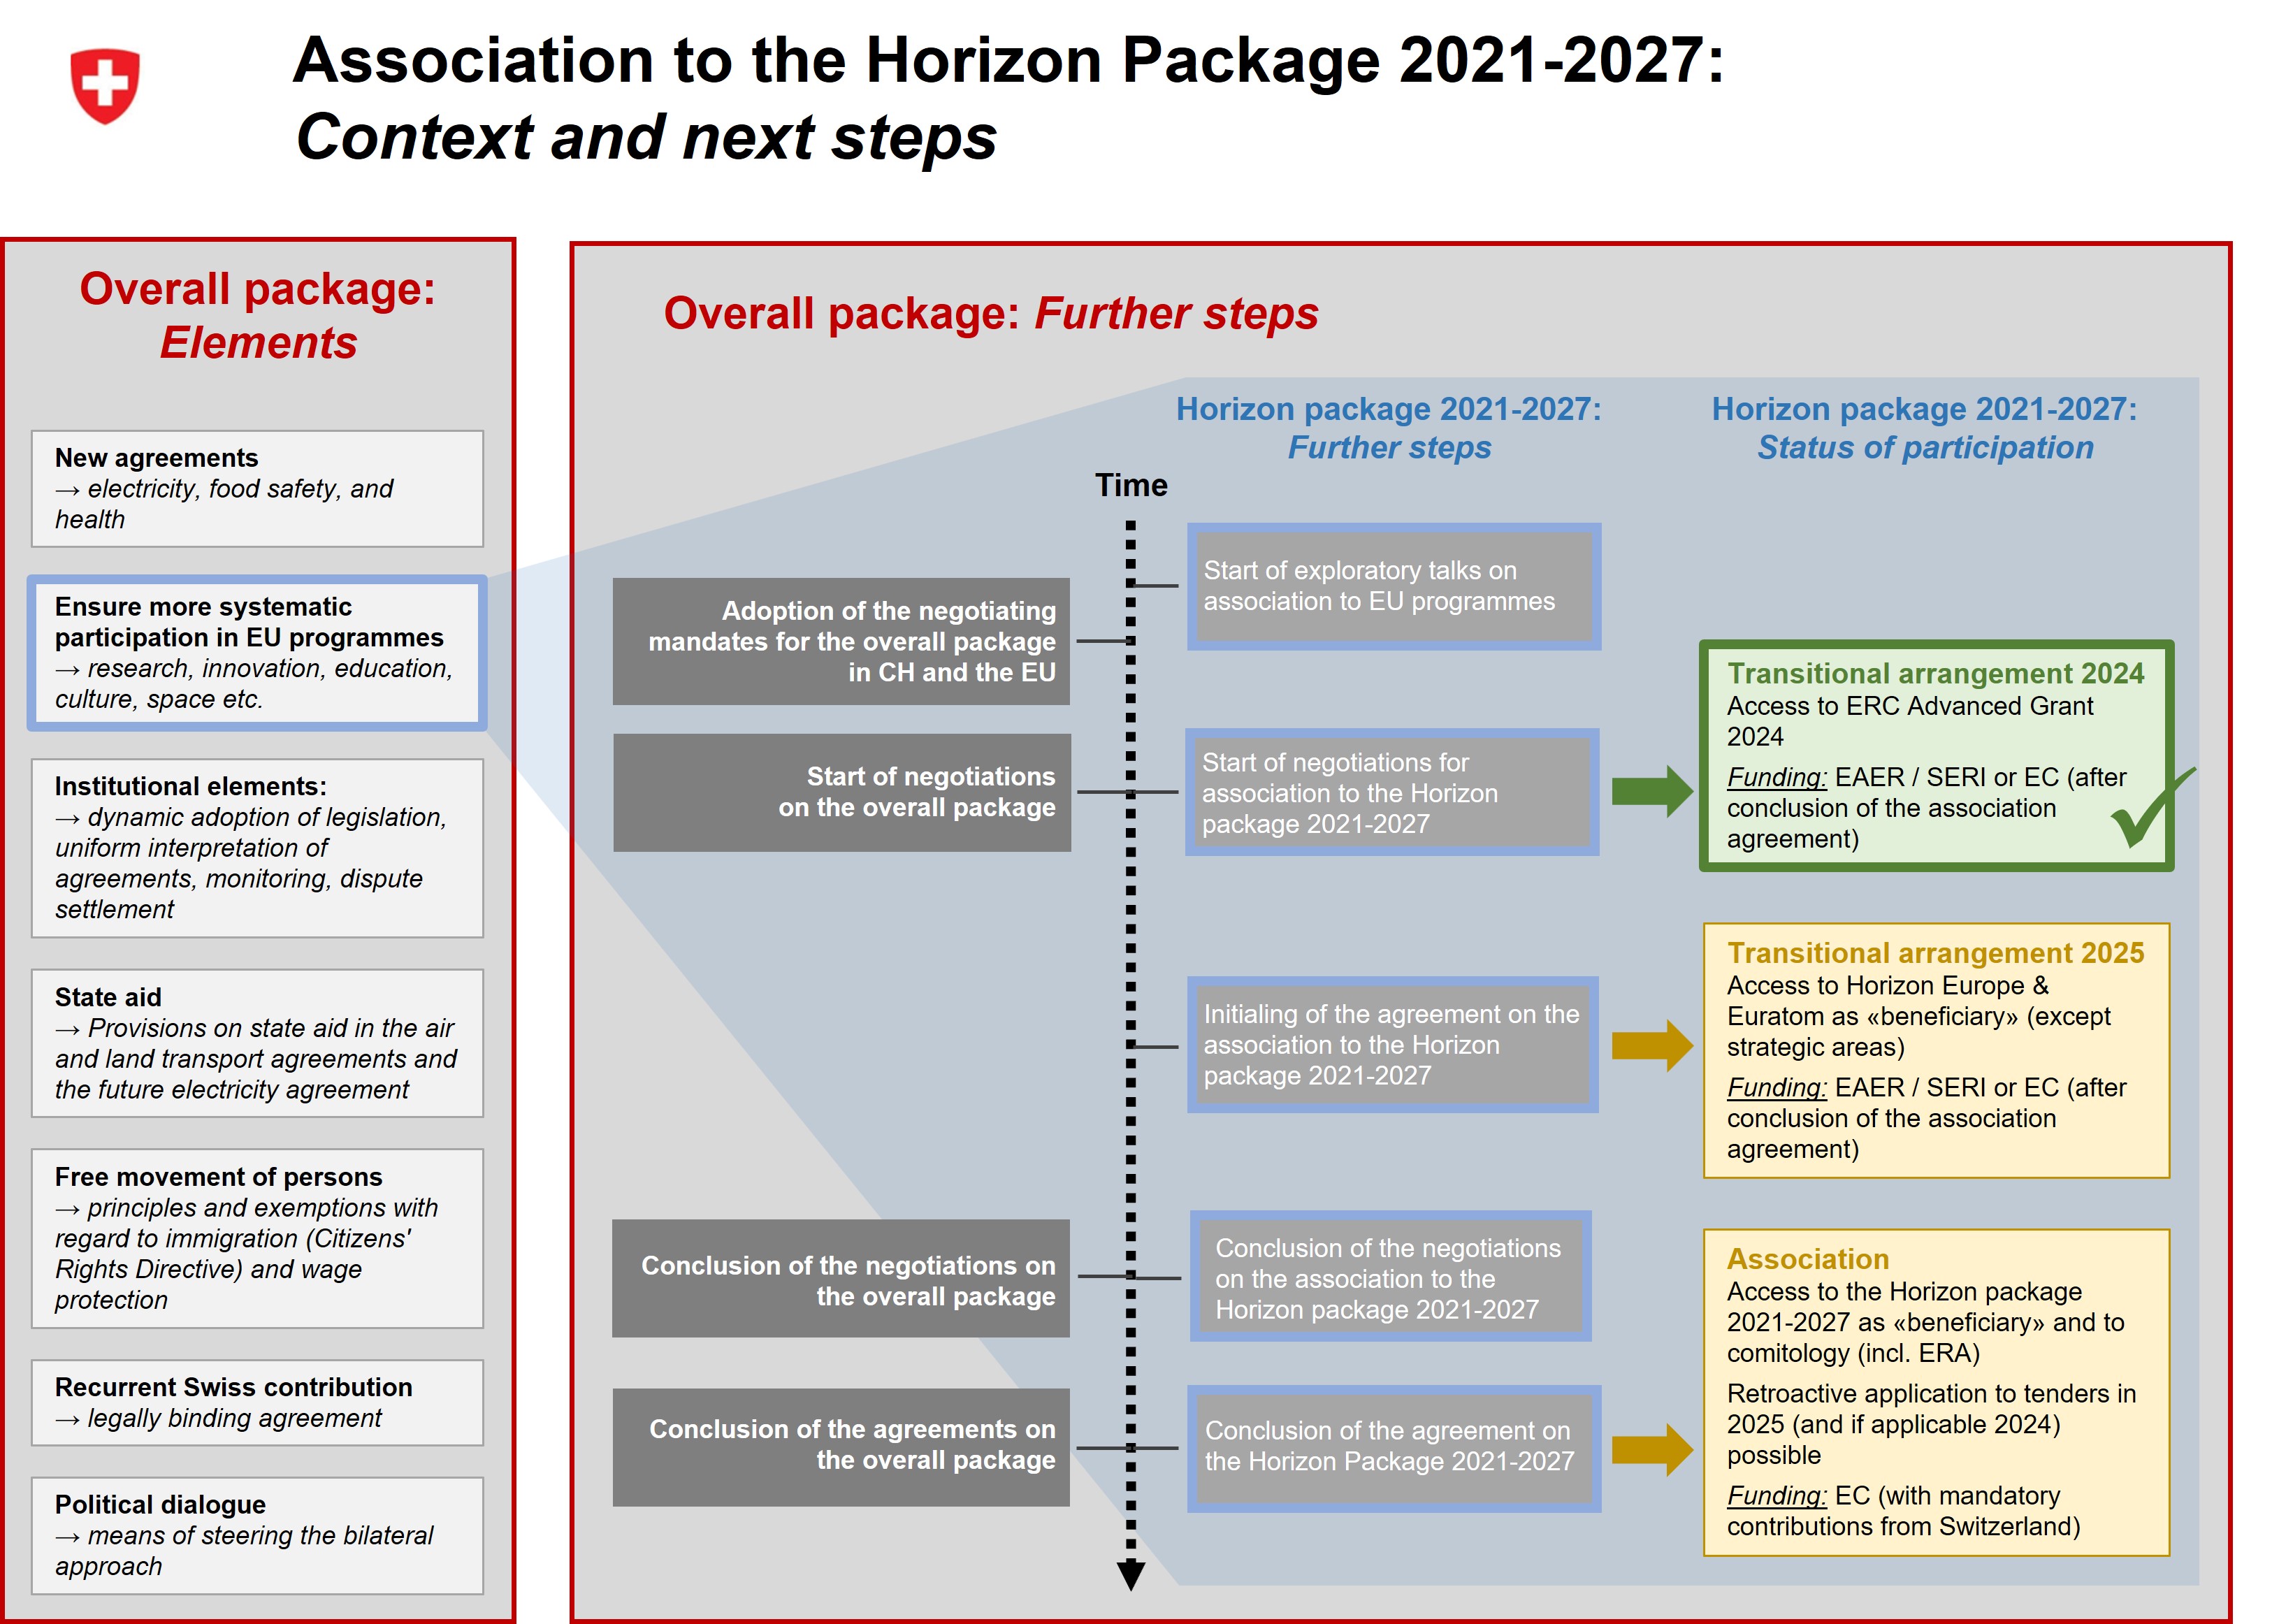 Association to the Horizon Package 2021-2027: Context and next steps